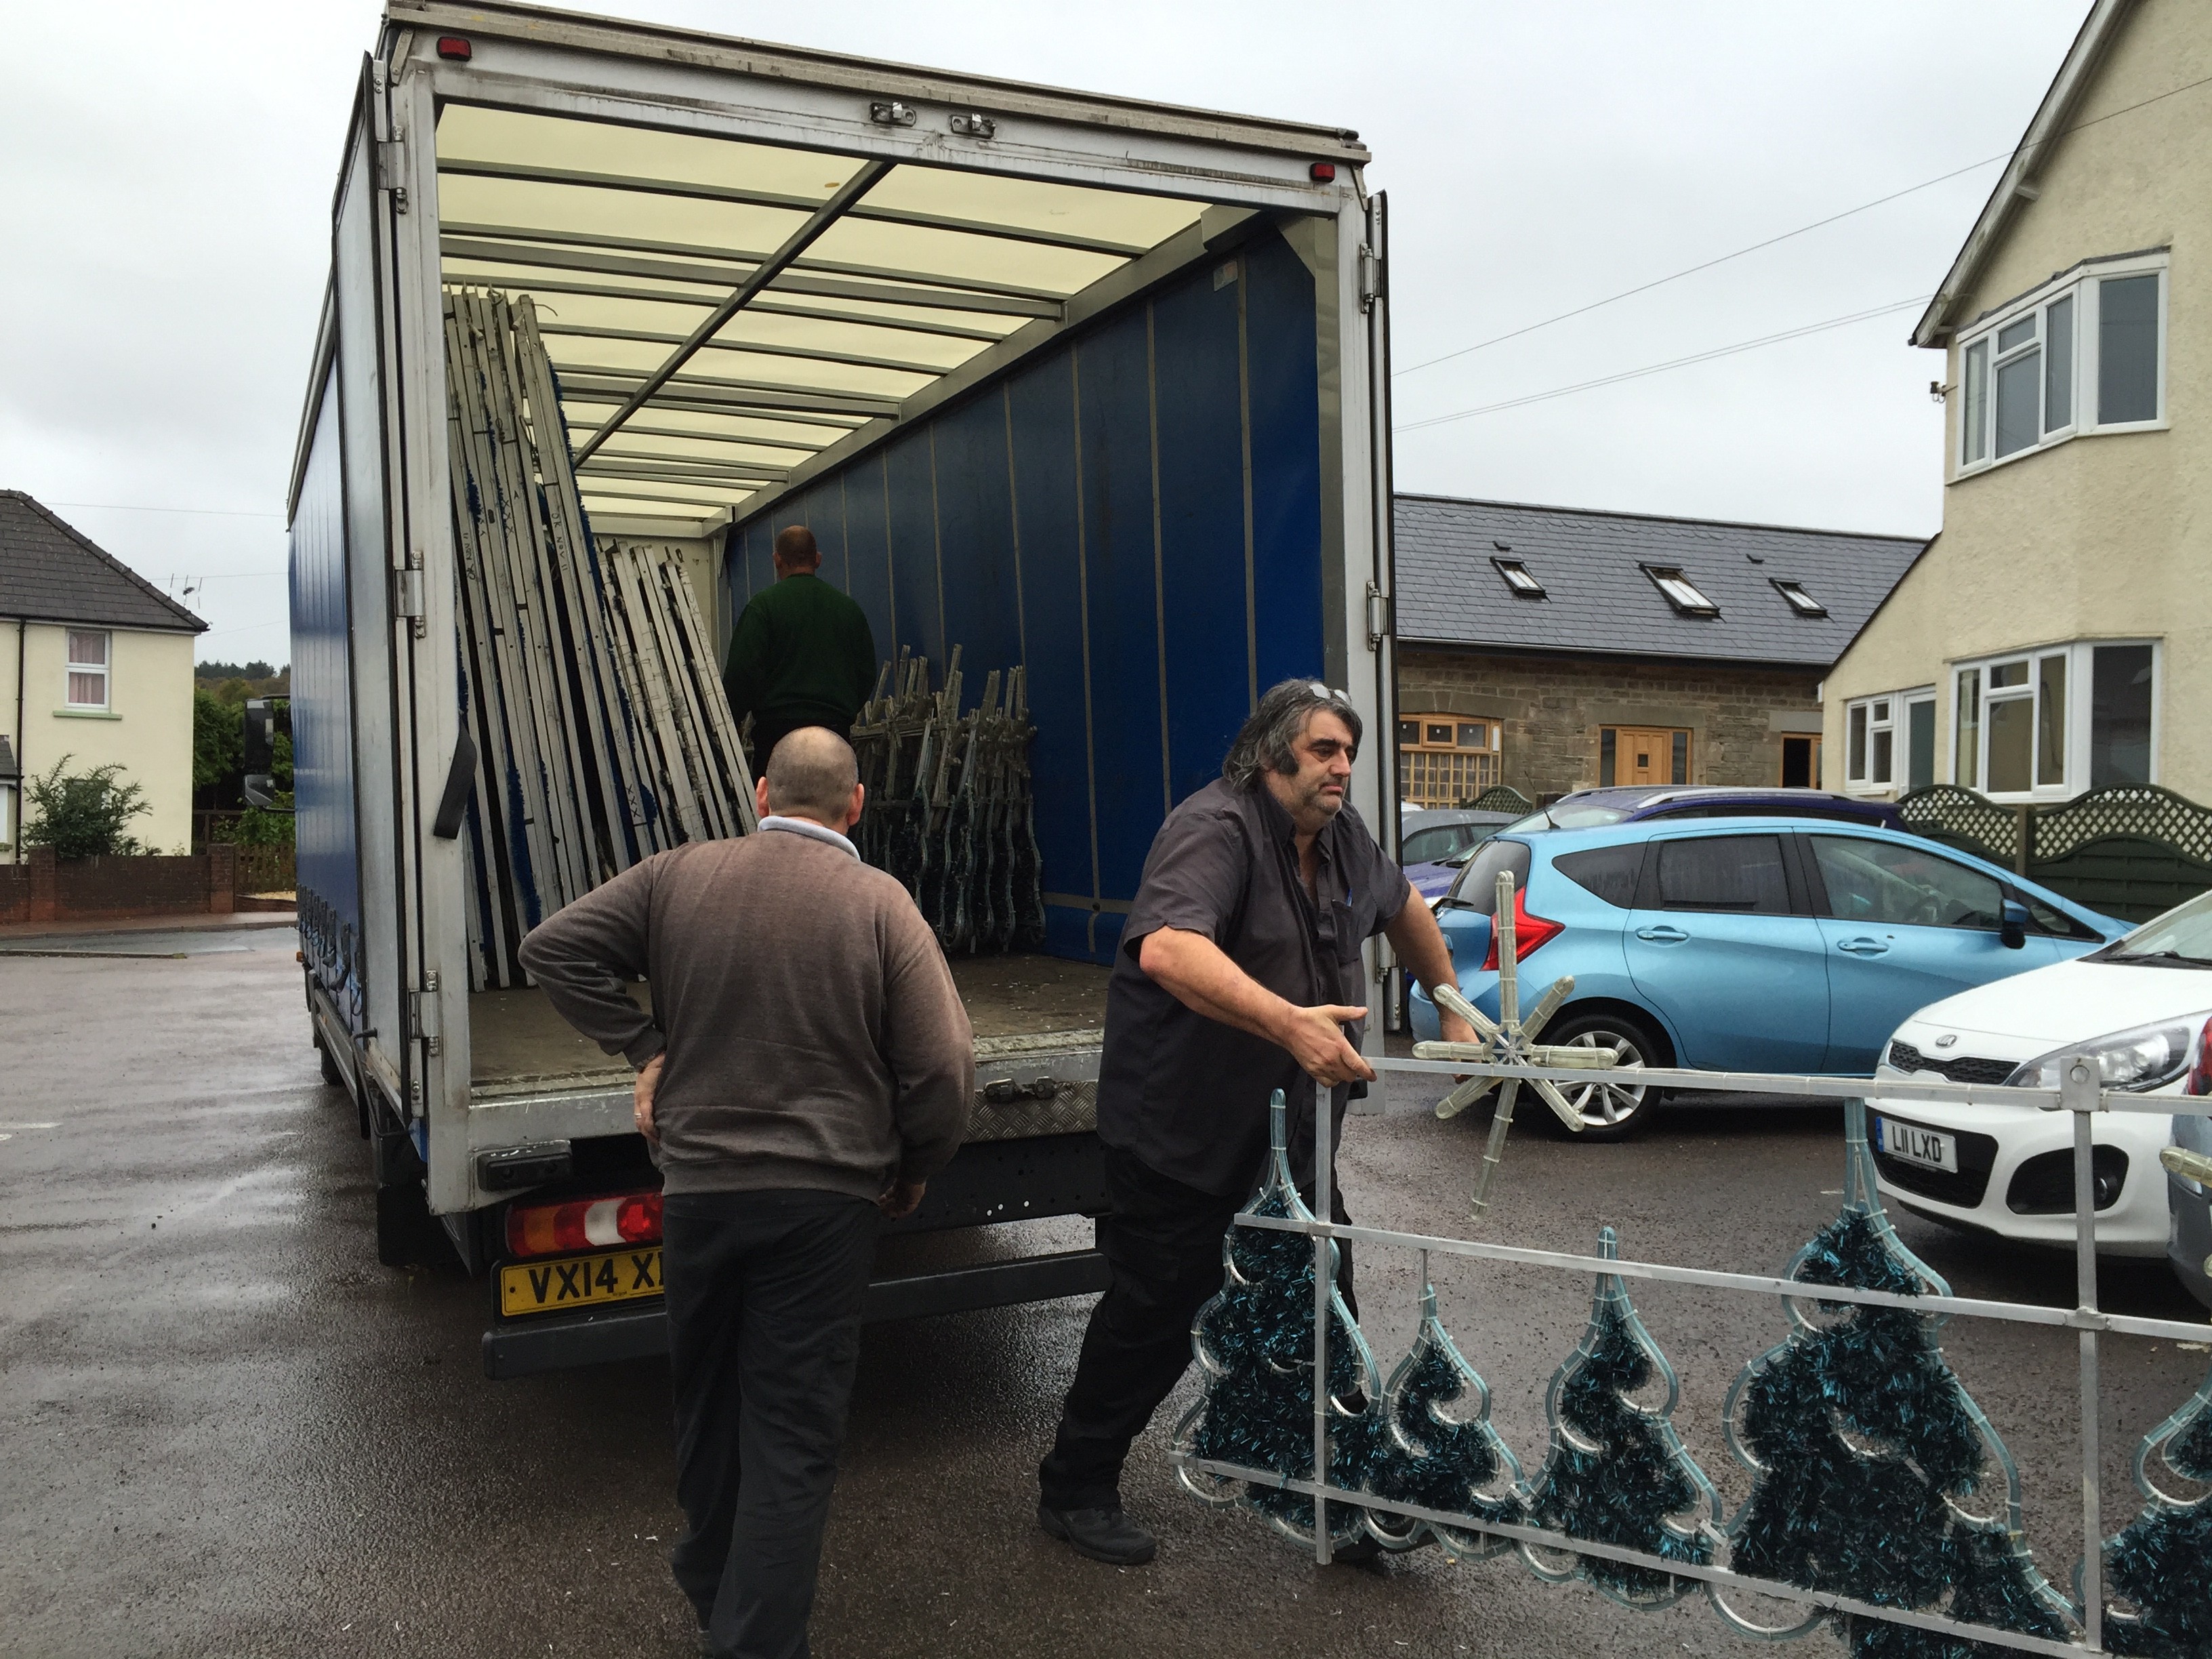 Christmas lights being unloaded from a lorry